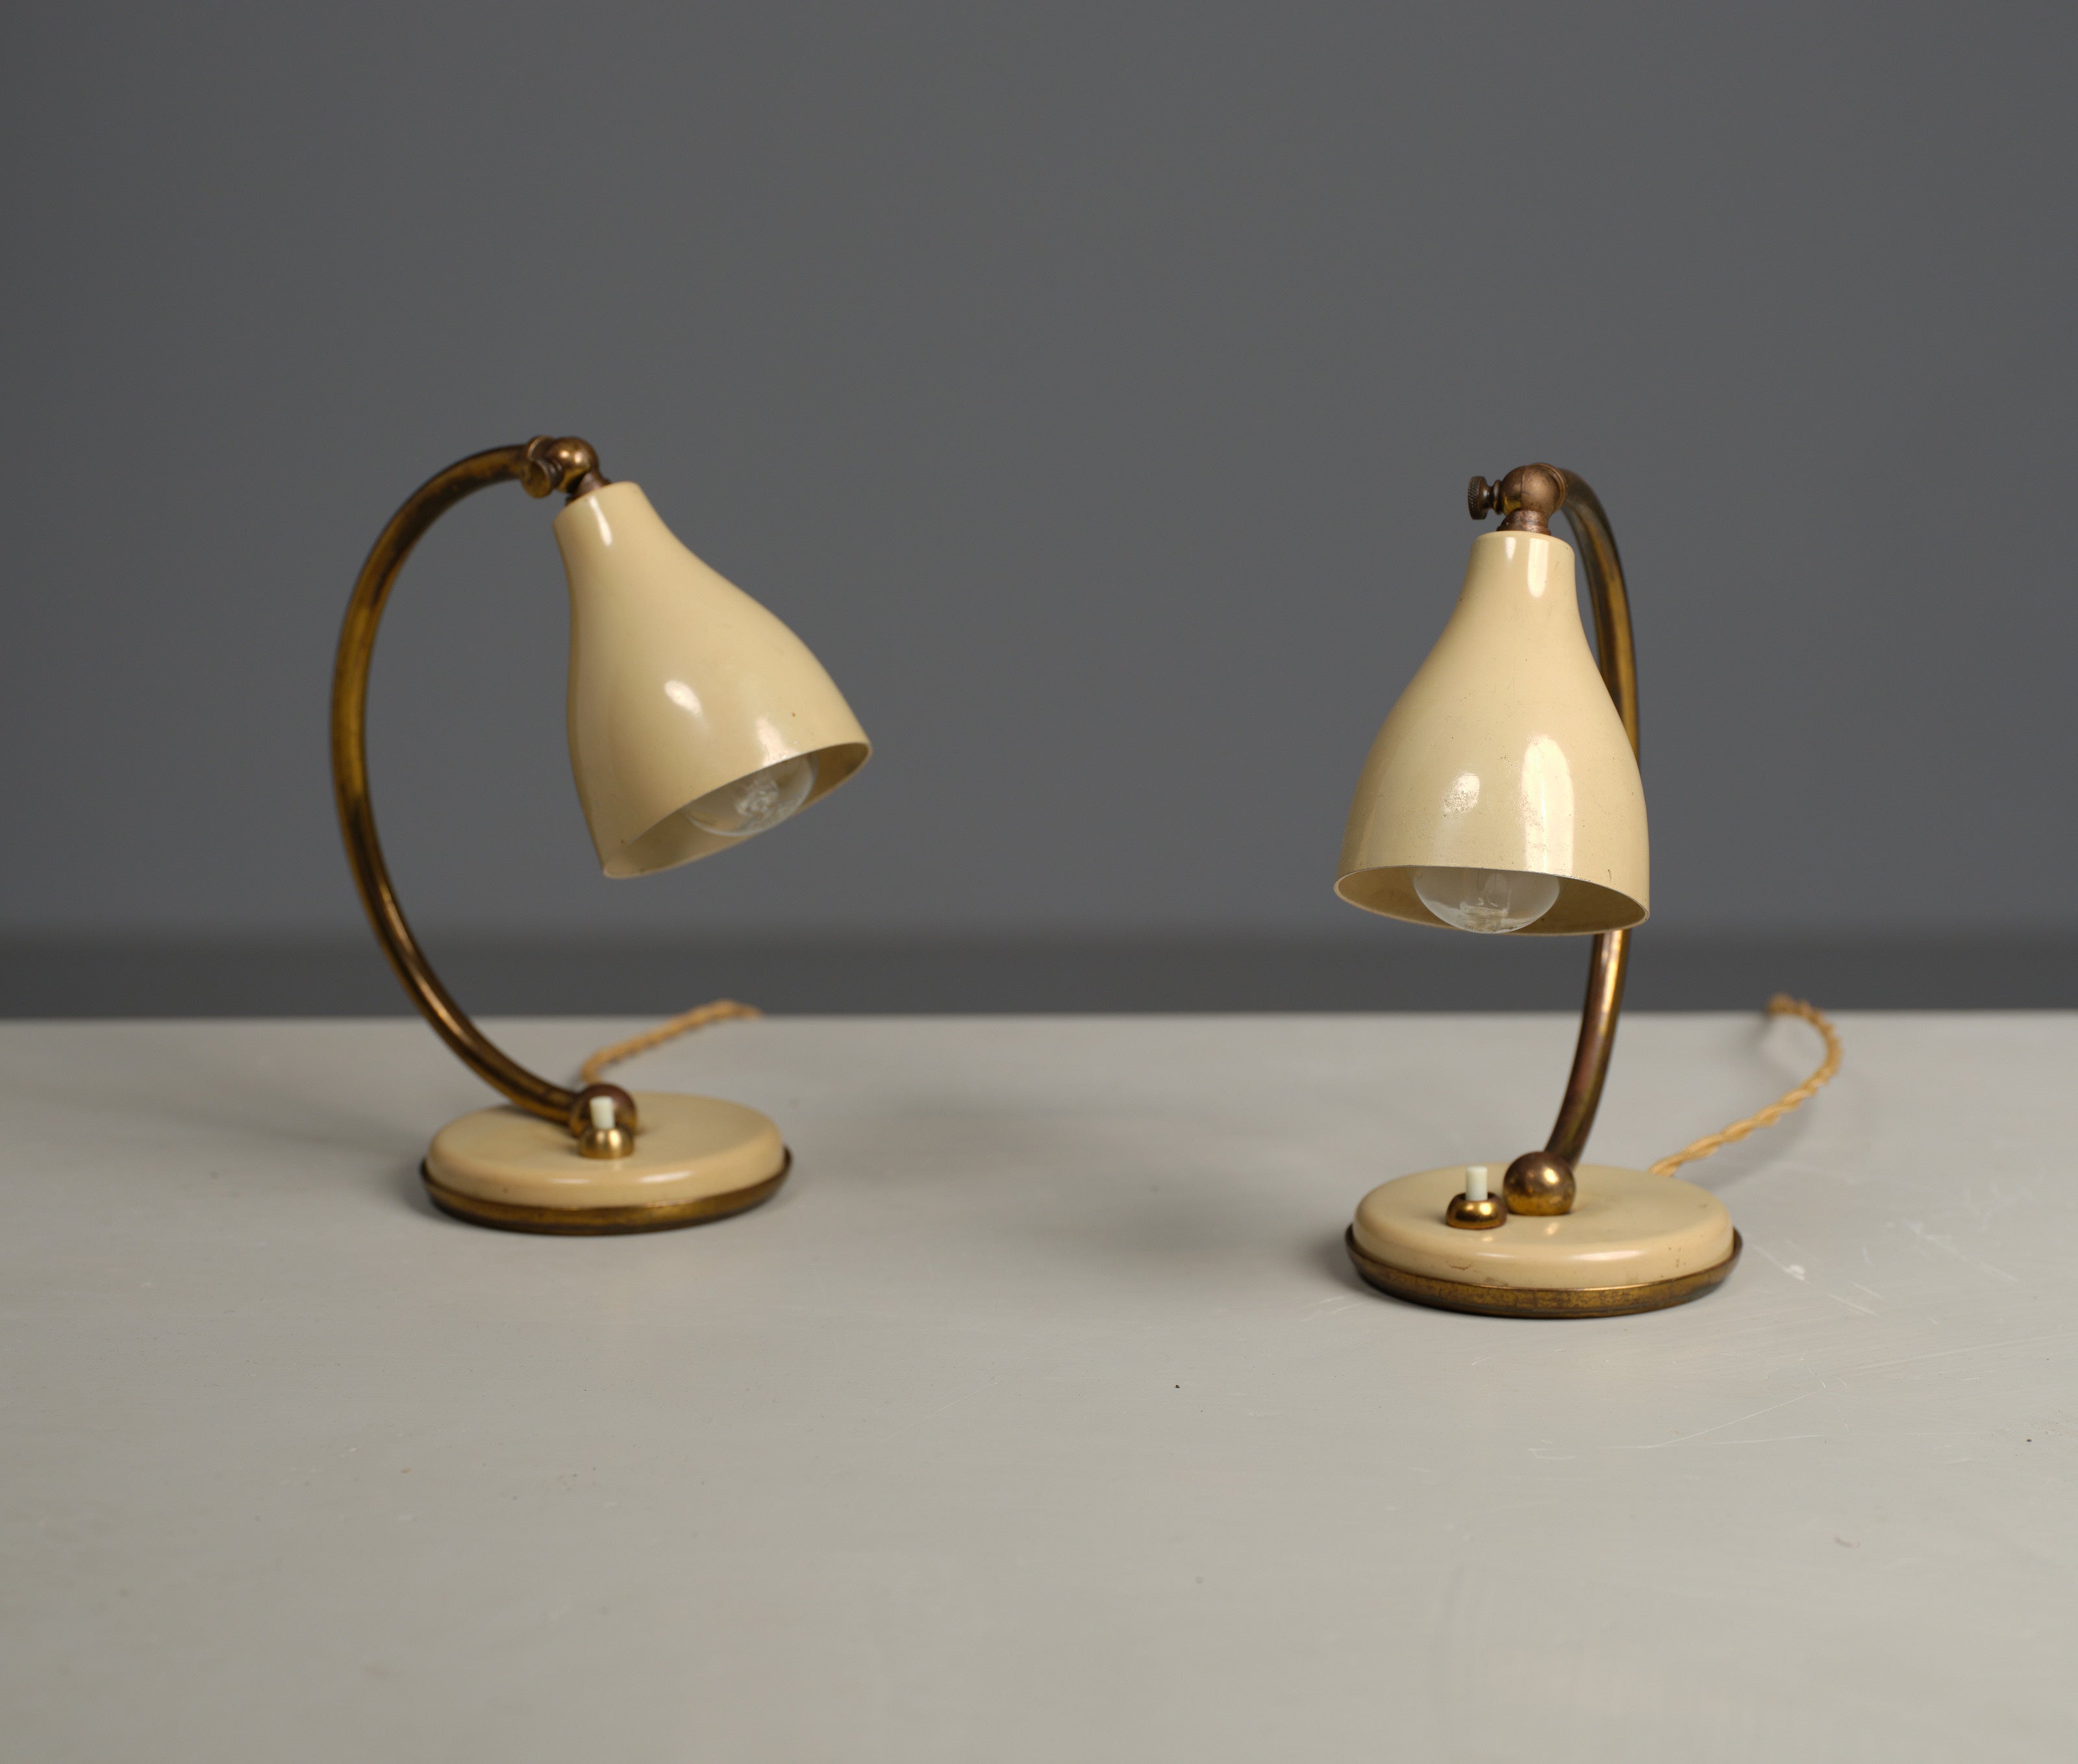 Pair of Abat Jours, Italian design, beige, brass, table lamps, 1950s

Two table lamps with arched brass stem in very good vintage conditions. 

2 standard E14 bulbs

The wire is original and functional

We can supply a US adapter if required.